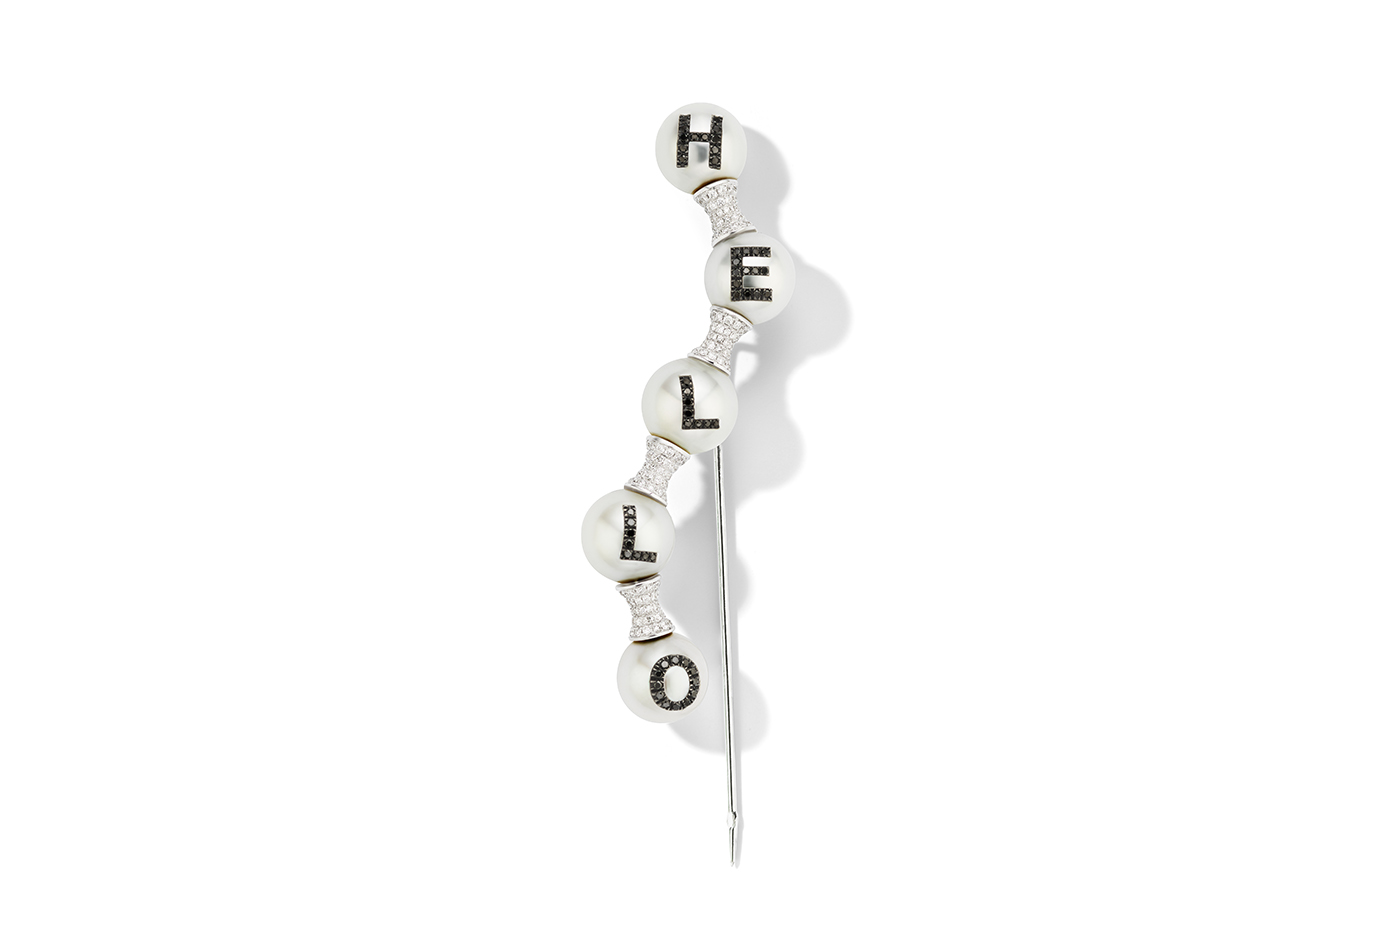 One outspoken brooch spells out the word HELLO in black diamonds - a witty conversation starter